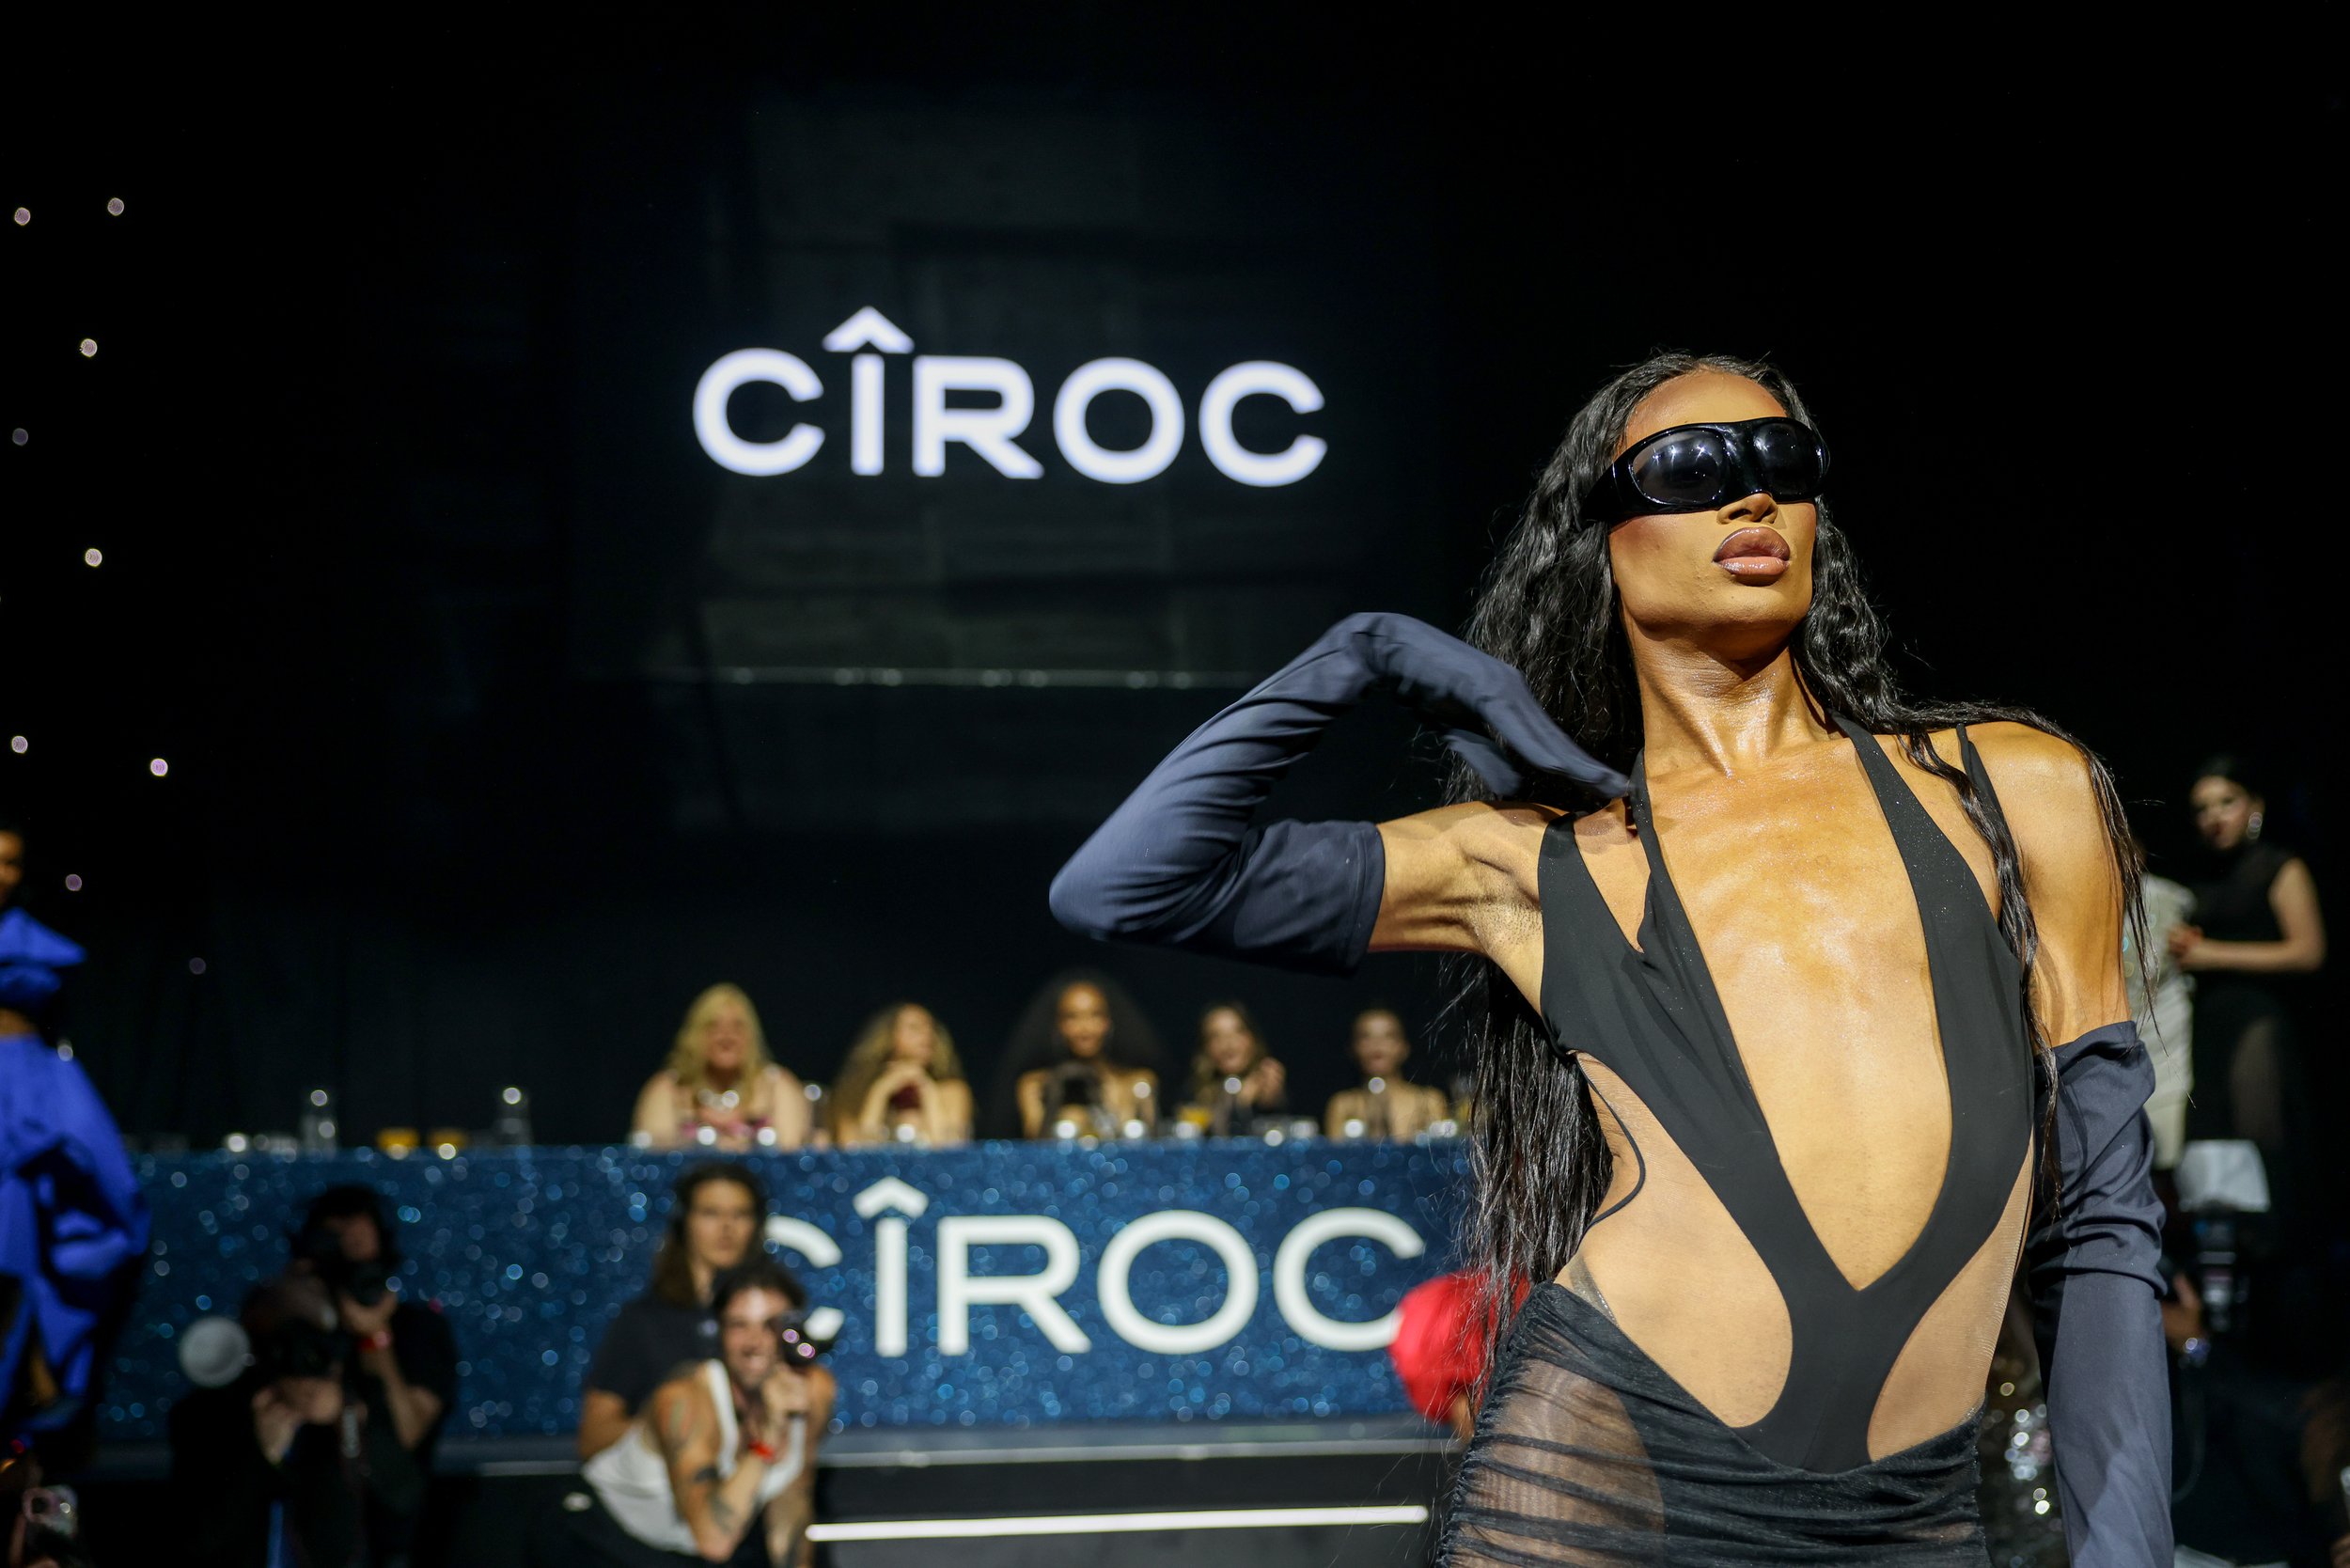  LONDON, ENGLAND - JUNE 30: Tayce attends the CÎROC Iconic Ball in support of Not A Phase at KOKO on June 30, 2022 in London, England. Today, the first ever CÎROC Iconic Ball brought the house down at legendary KOKO Camden in celebration of the 50th 